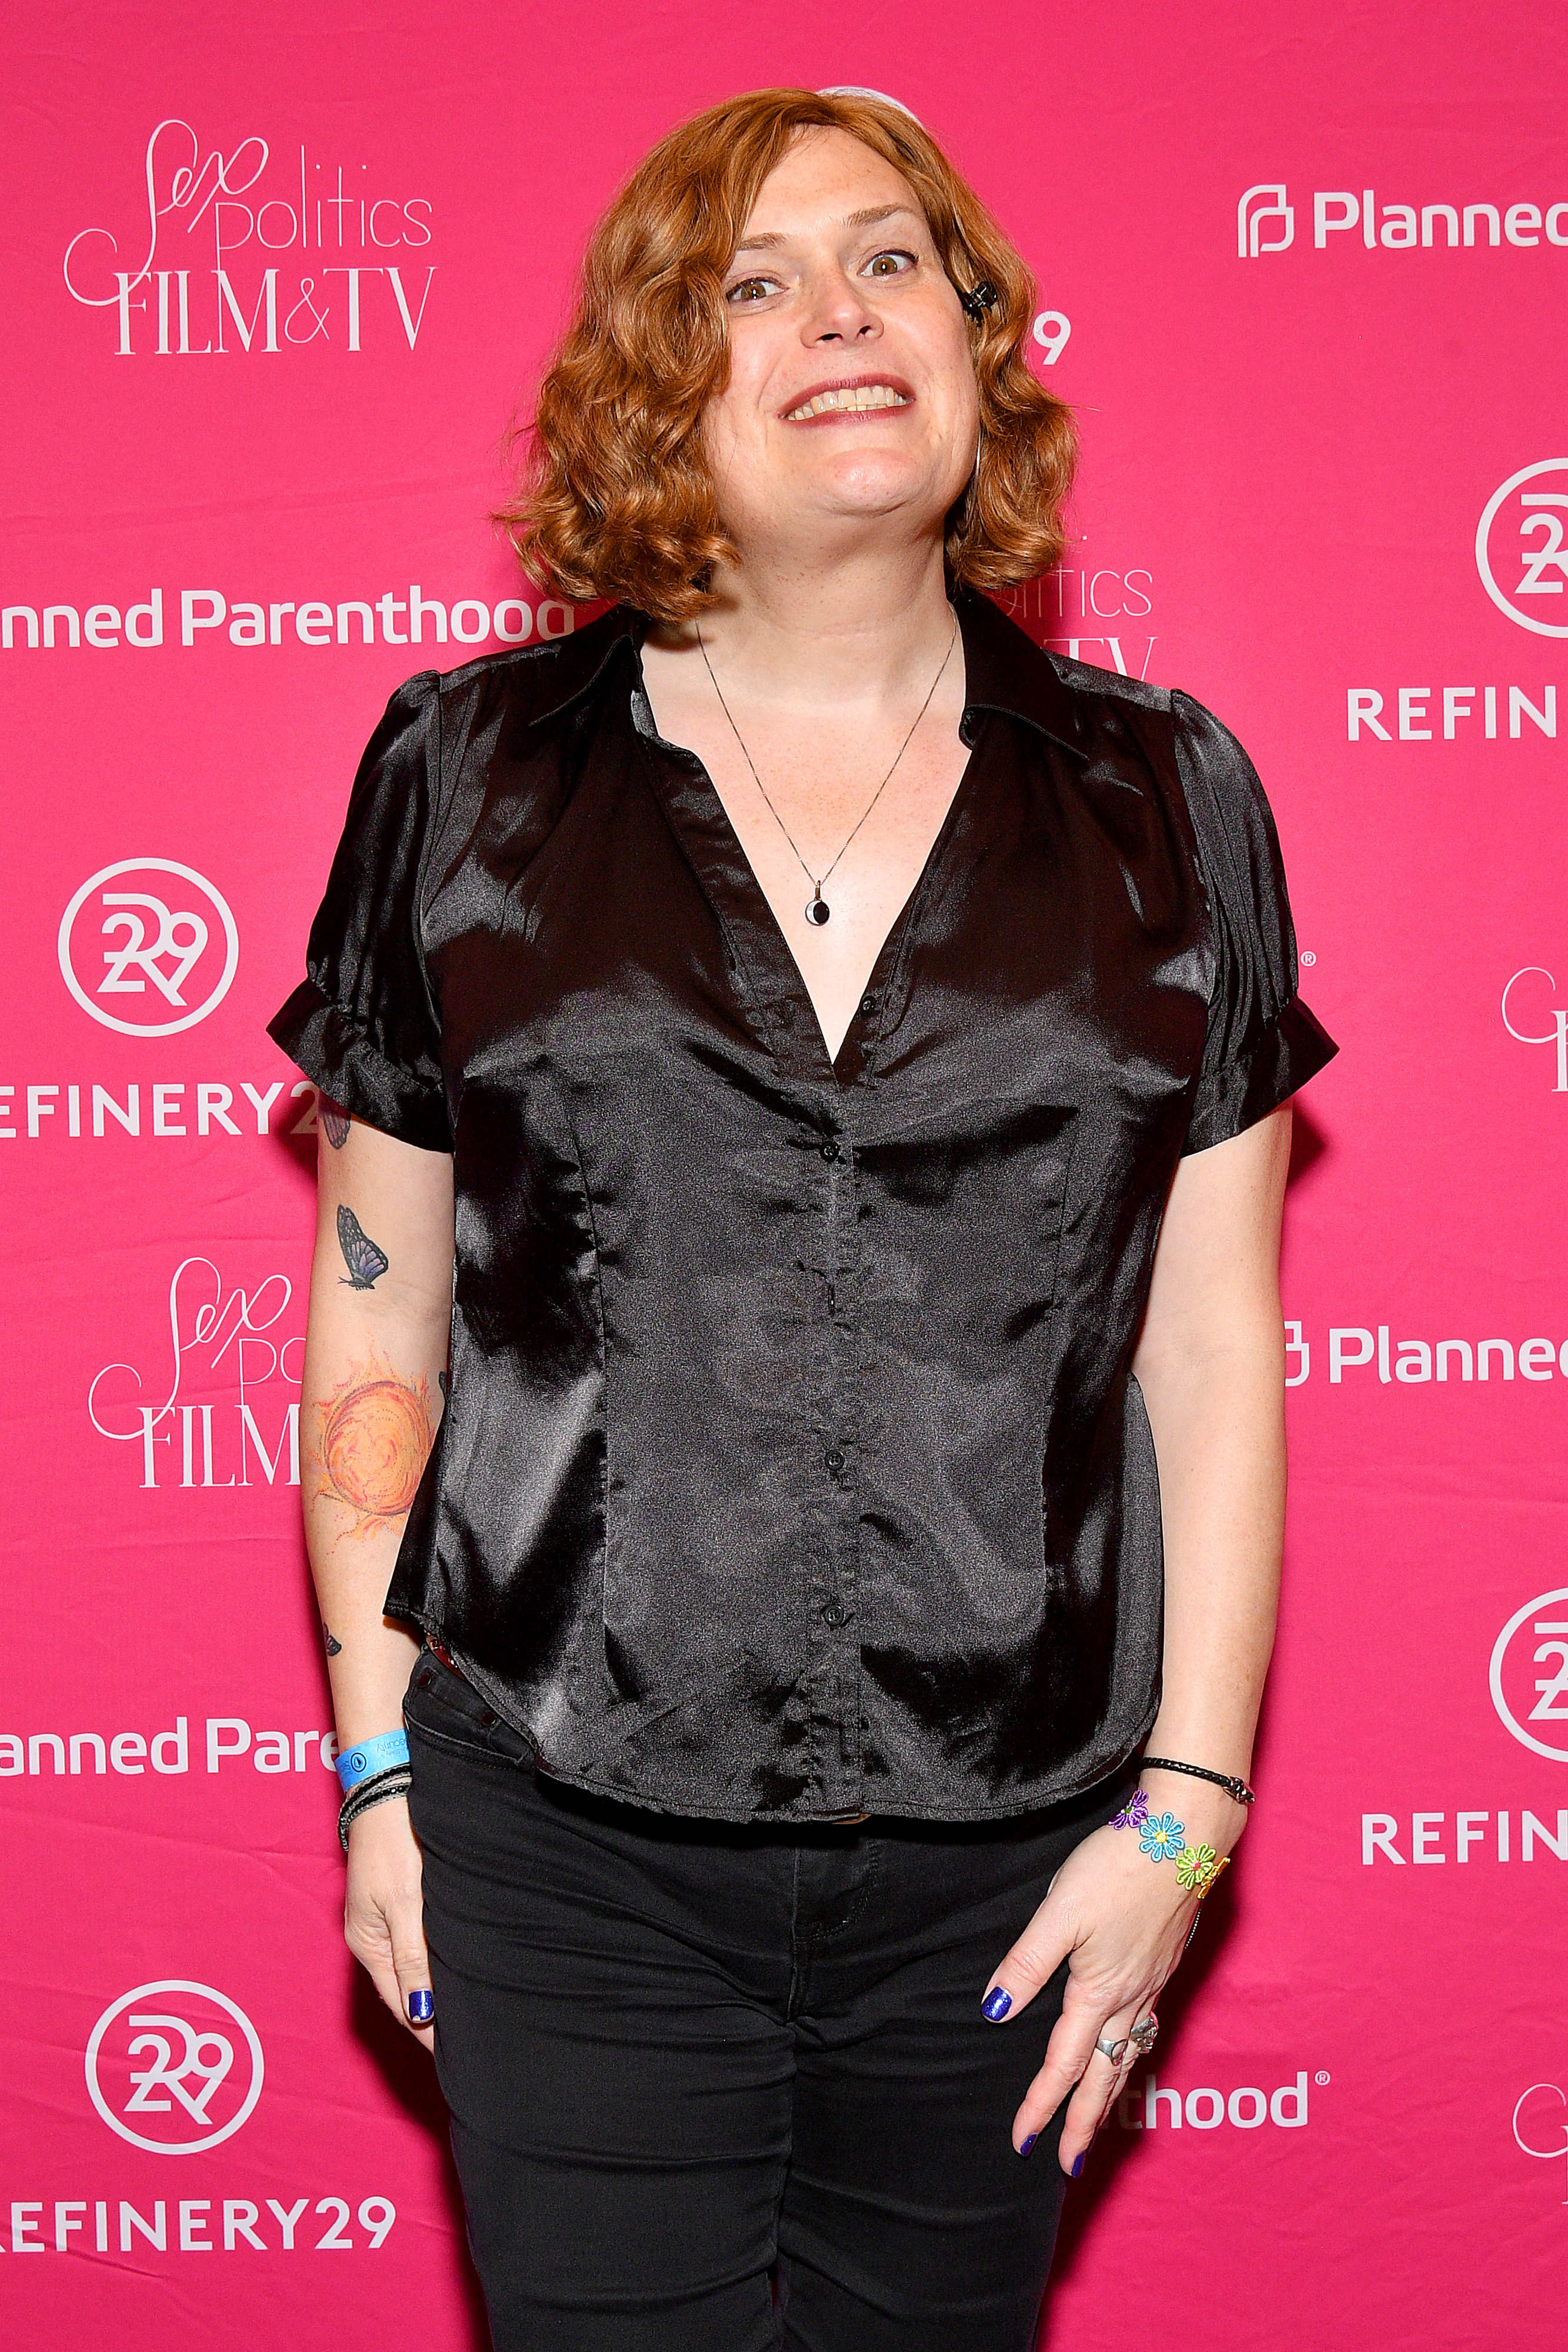 Lilly Wachowski attends the Planned Parenthood's Sex, Politics, Film, & TV Reception at Sundance on January 26, 2020 in Park City, Utah. | Source: Getty Images